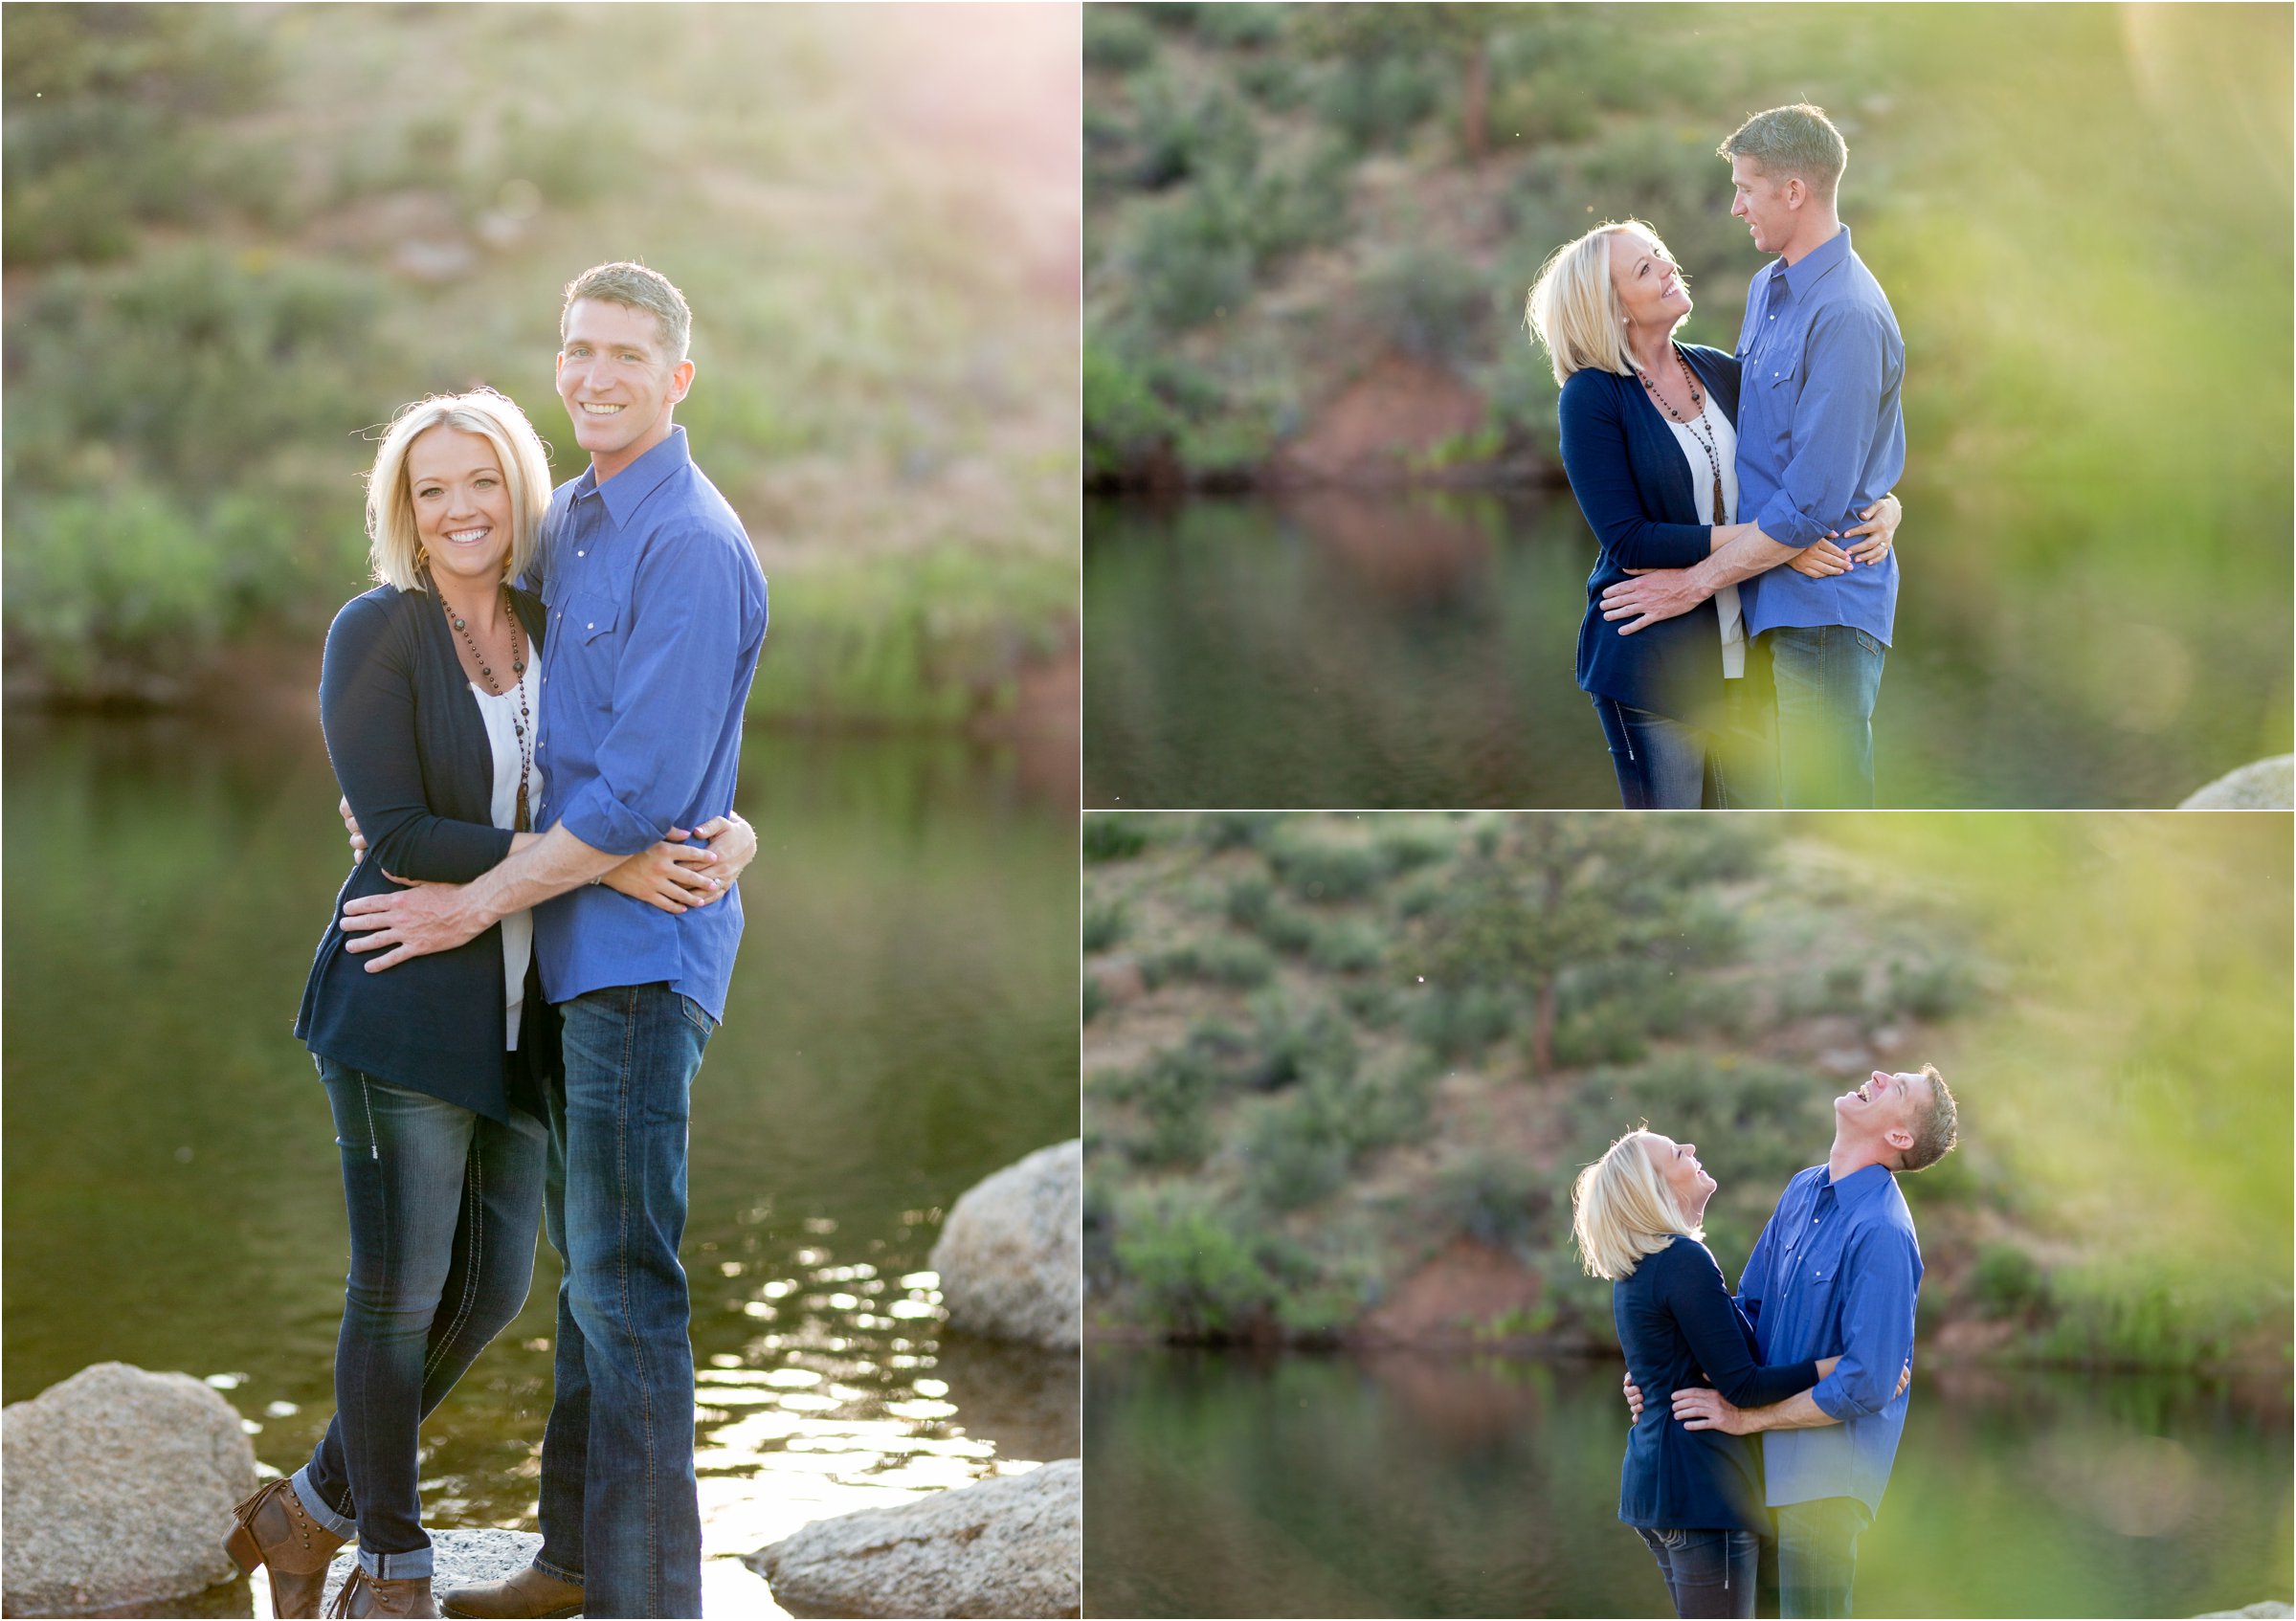 Cheyenne, Wyoming Engagement Session at Curt Gowdy State Park by Norther Colorado Wedding Photographer 